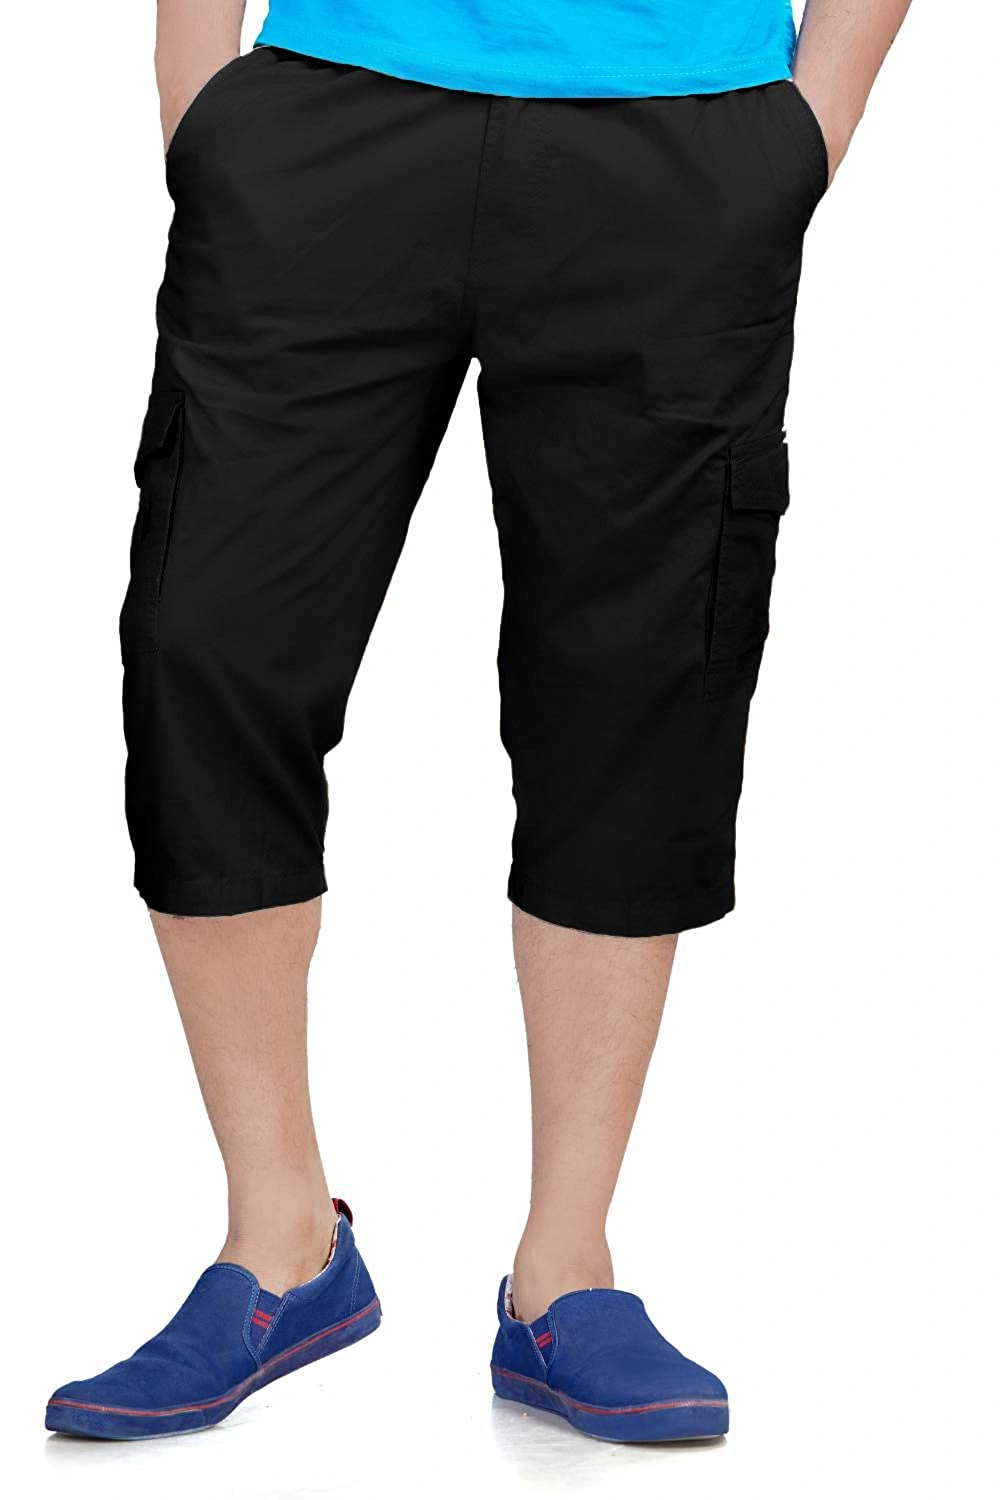 Cropped pullon trousers  Black  Ladies  HM IN